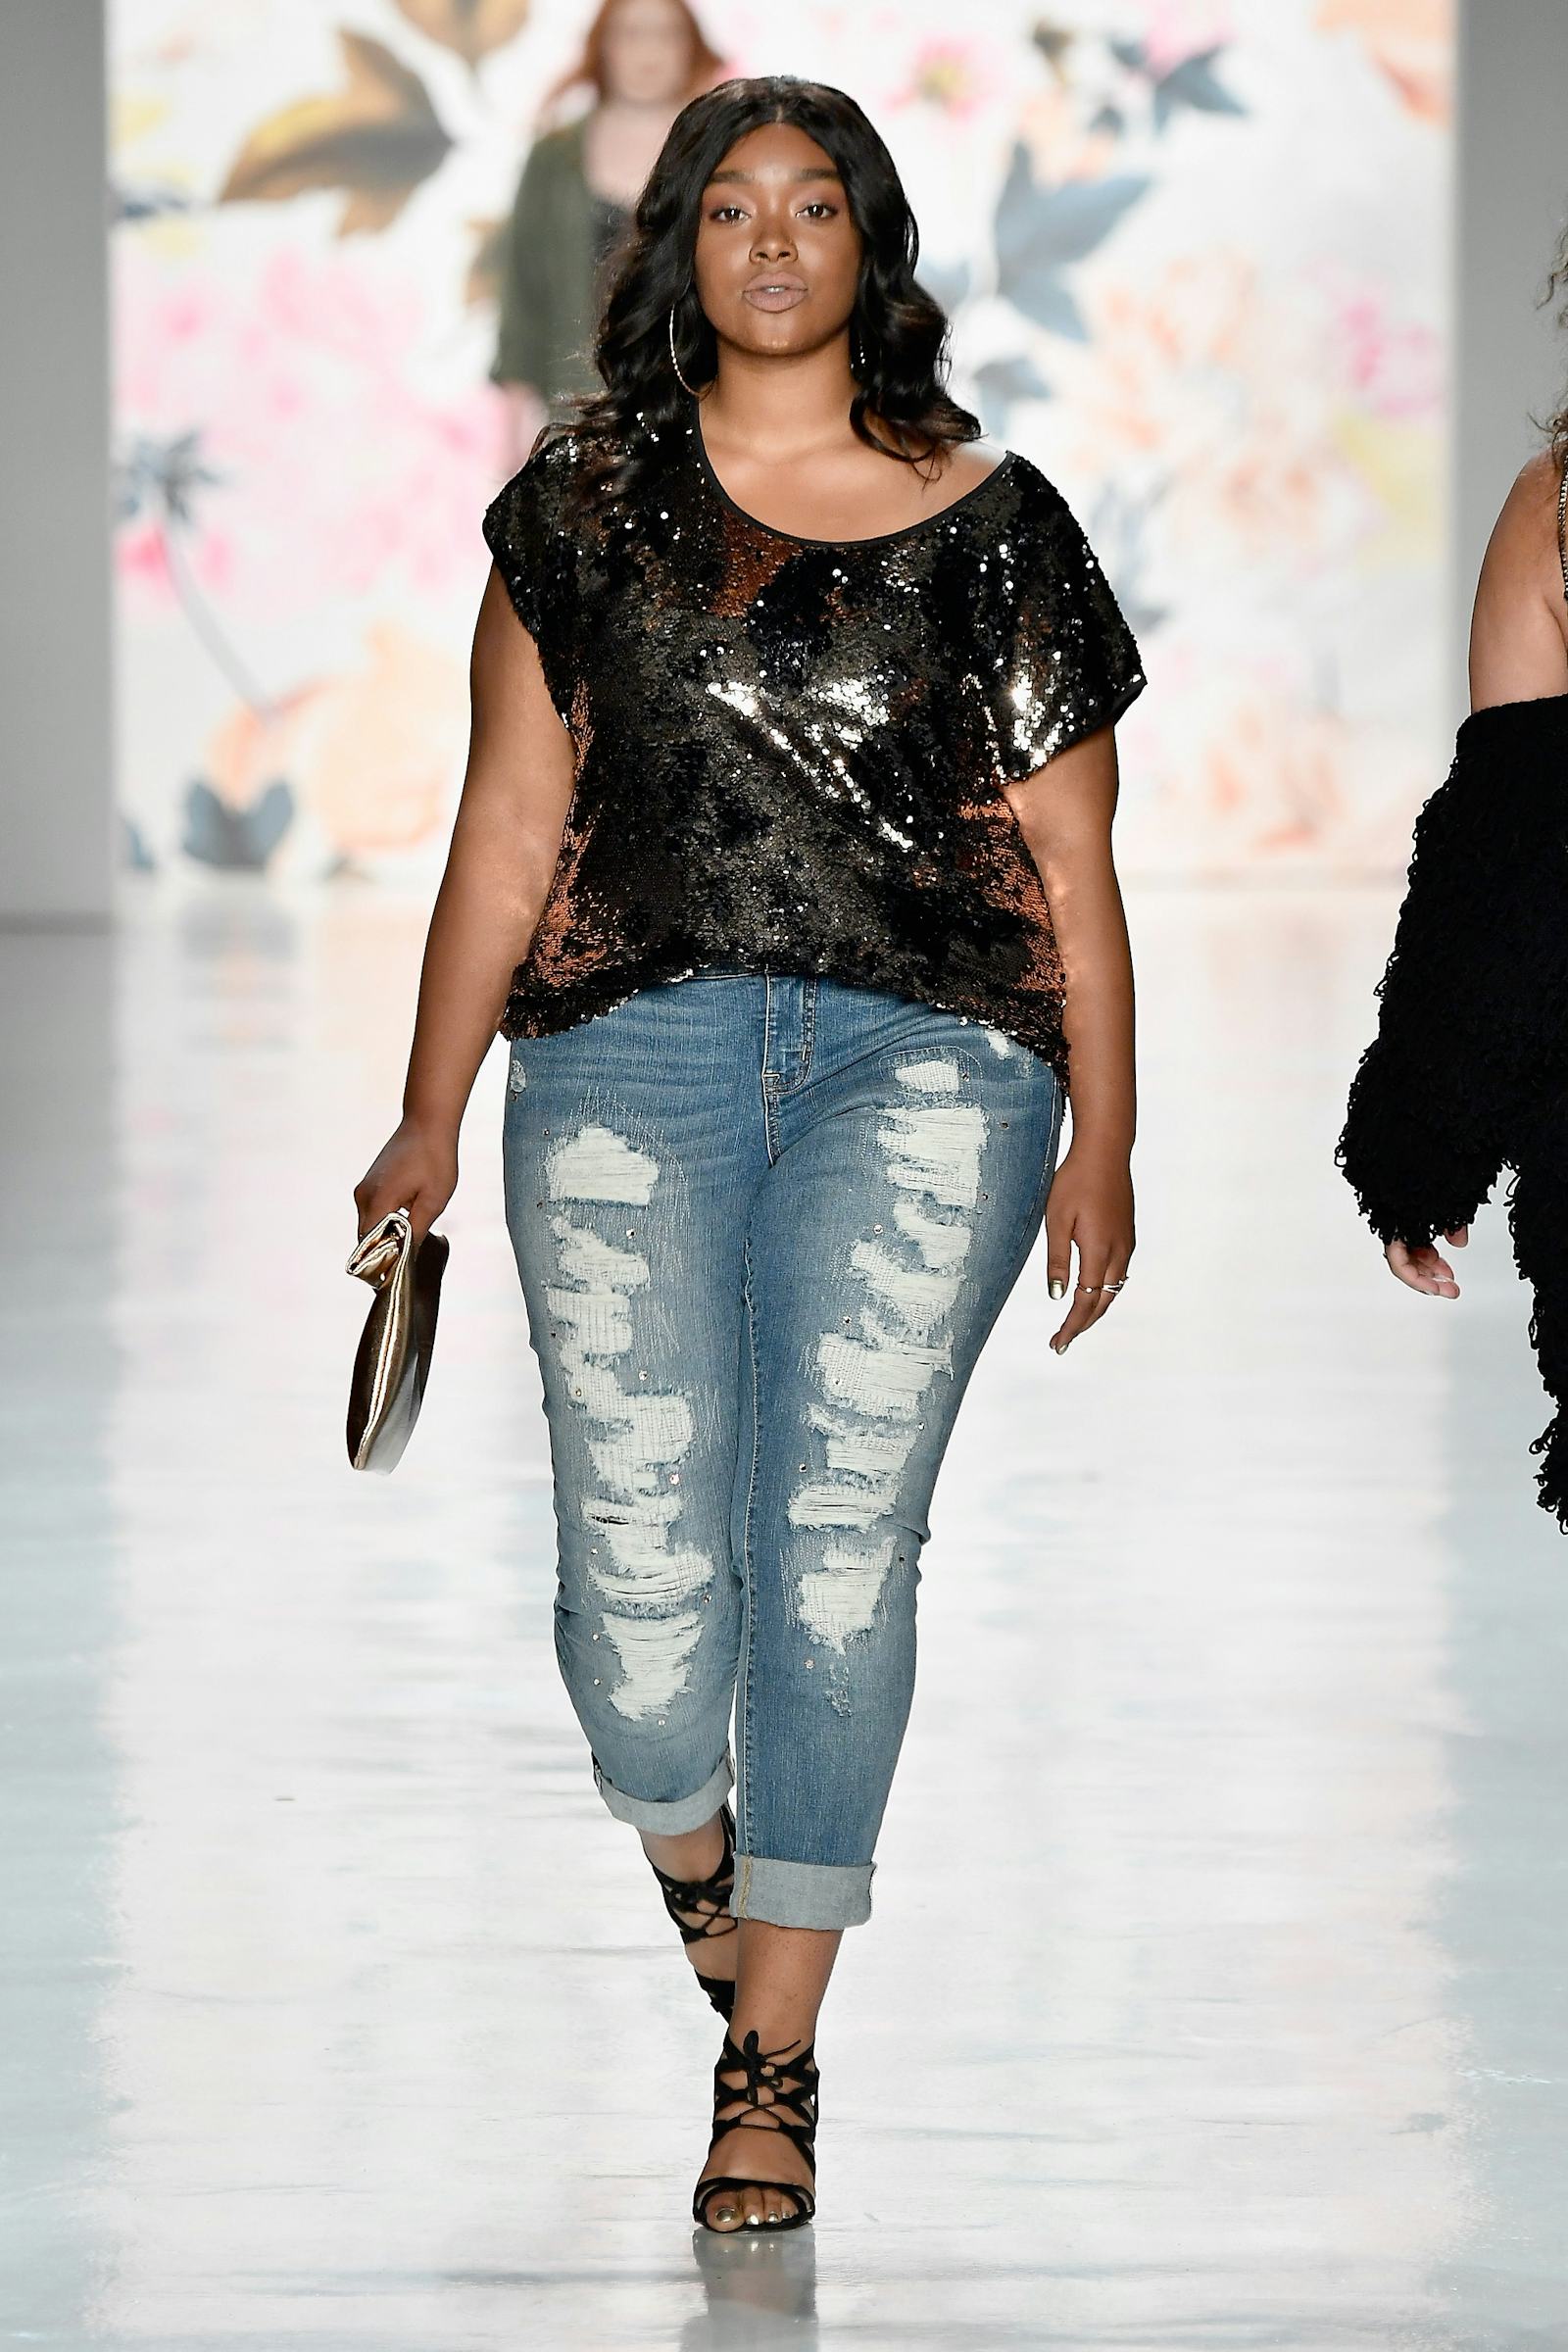 Why Is Trendy Plus Size Fashion So Rare, Especially When It's Proven ...